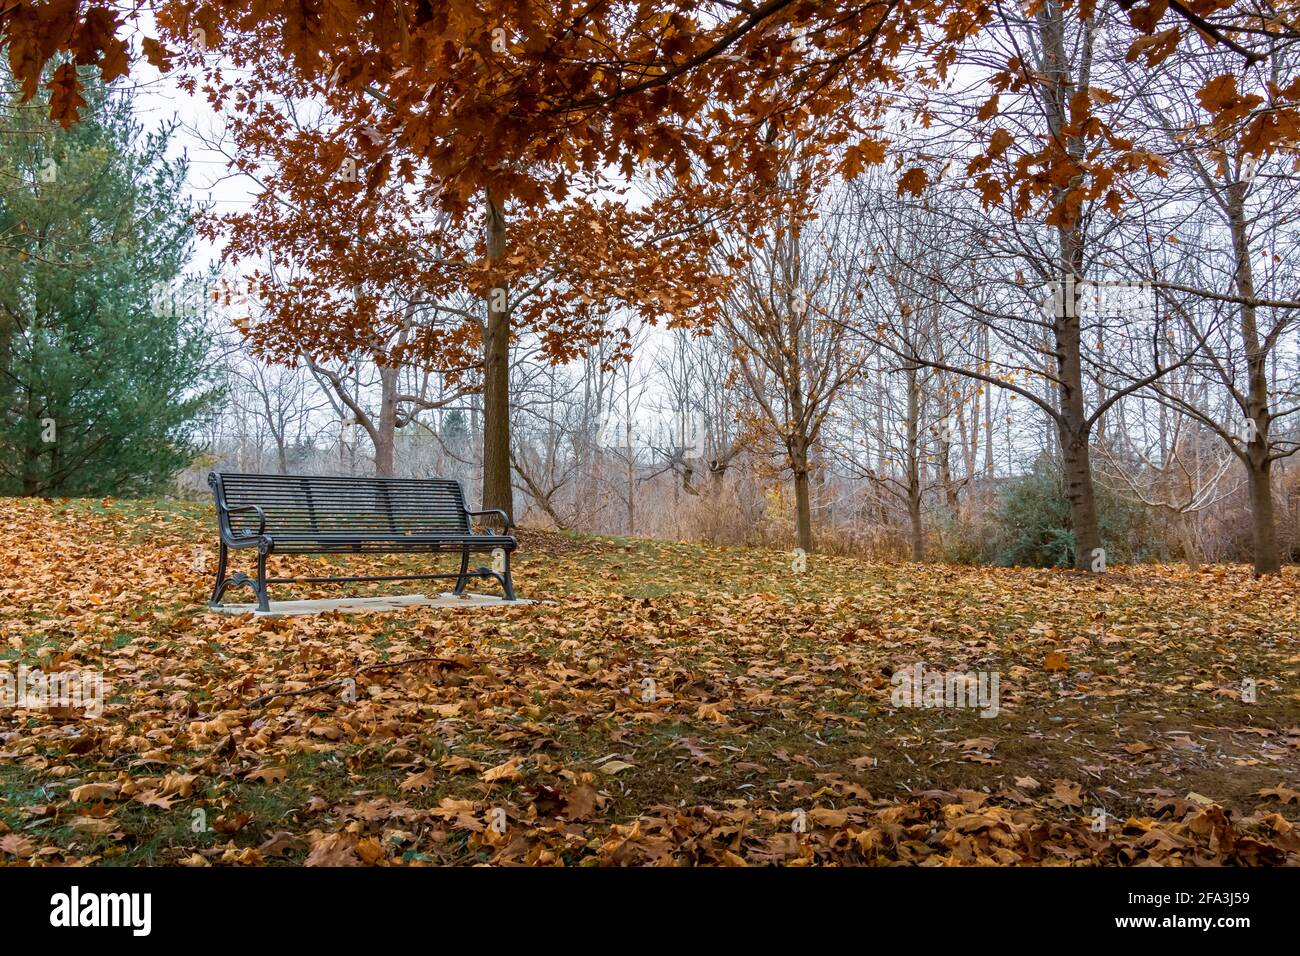 Metal park bench in autumn with leaves on the ground and red leaves on the oak trees above Stock Photo